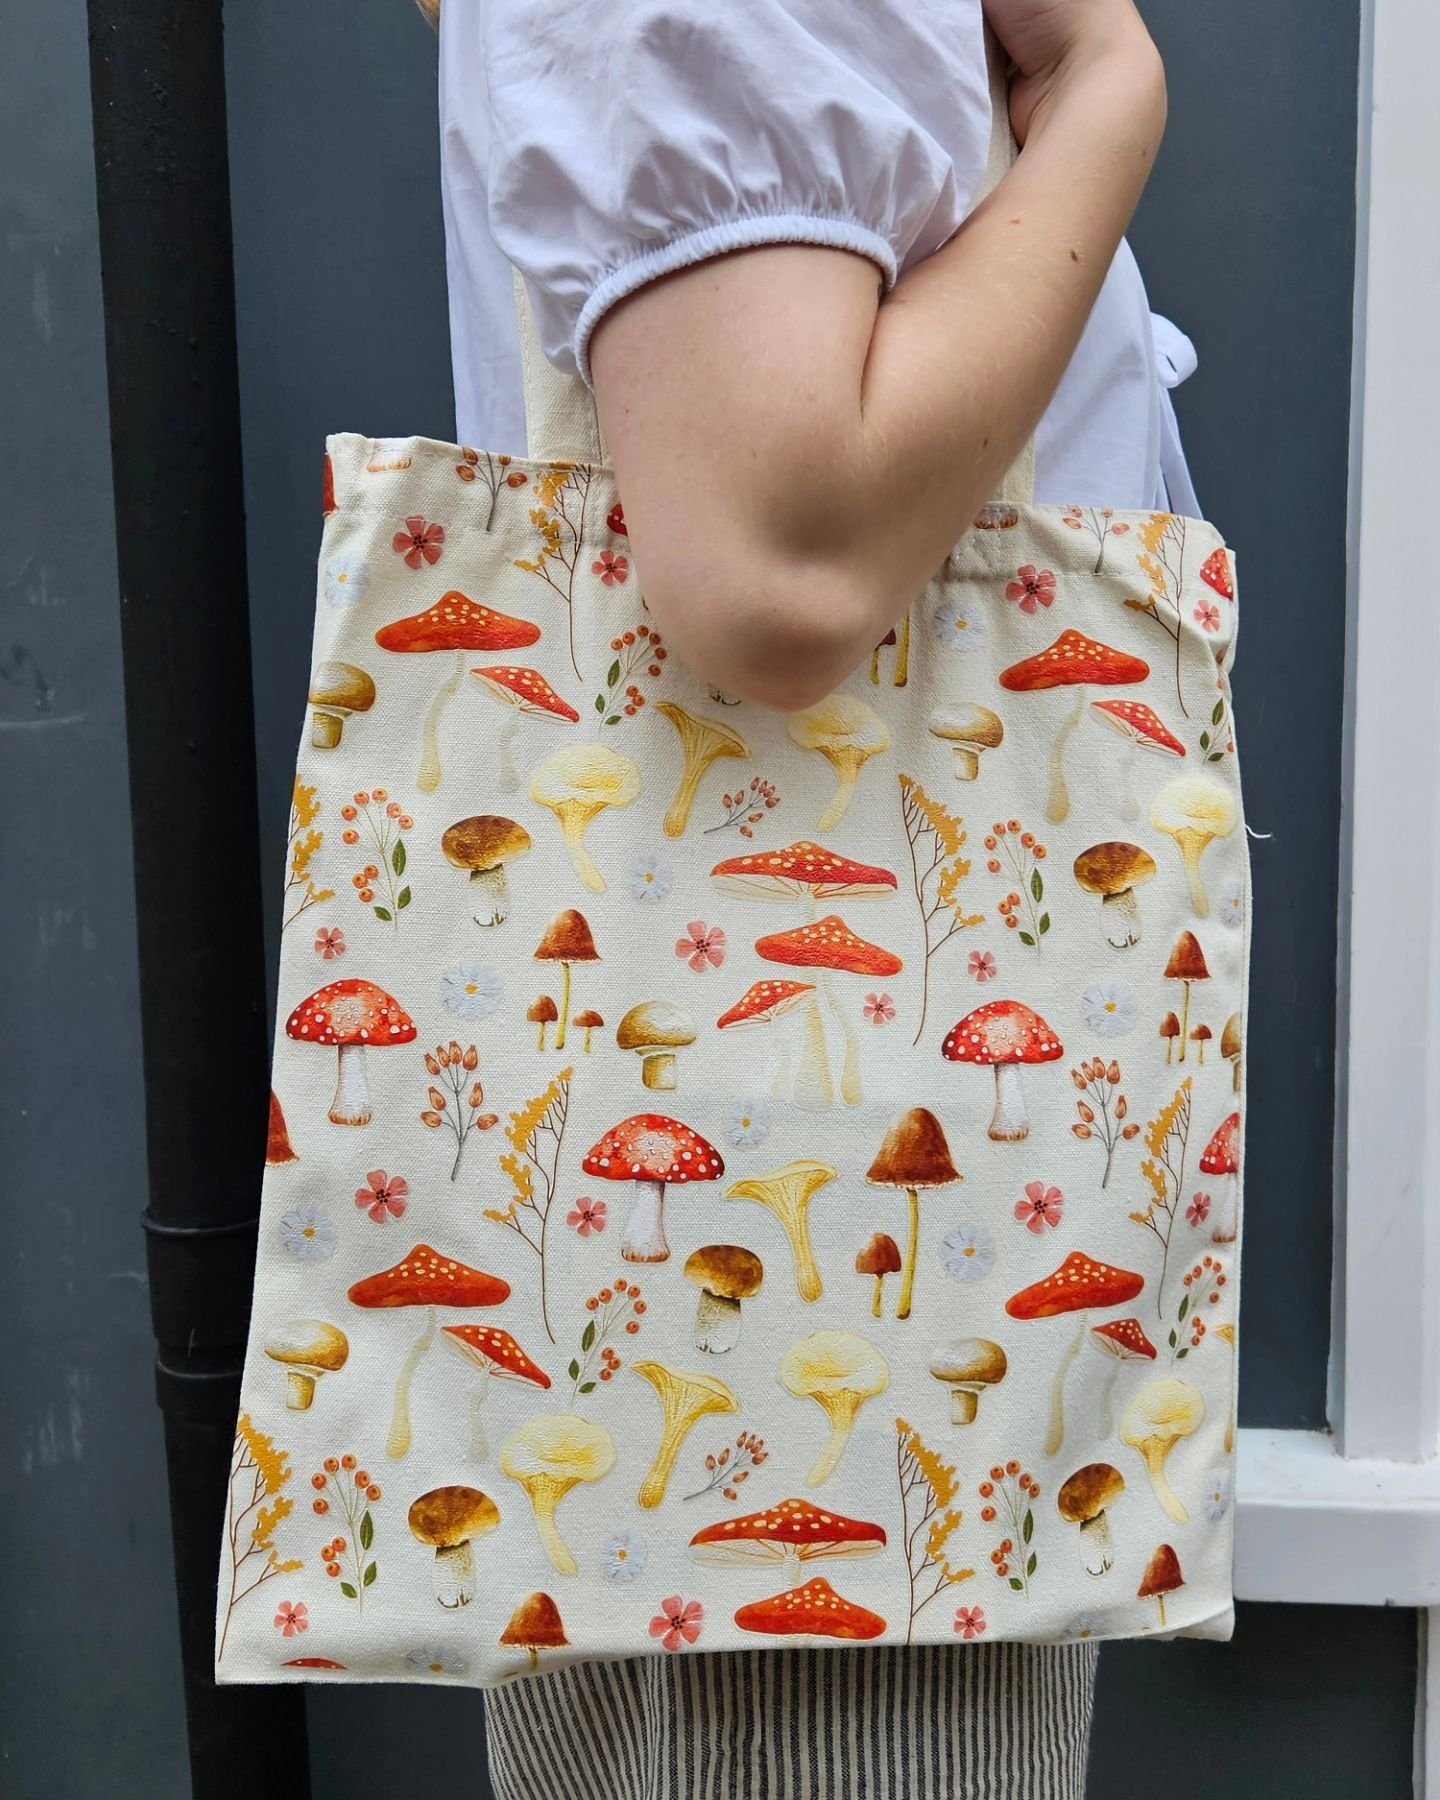 The one and only tote bag for our fellow mushroom lovers..🍄🍂🌾

&pound;9